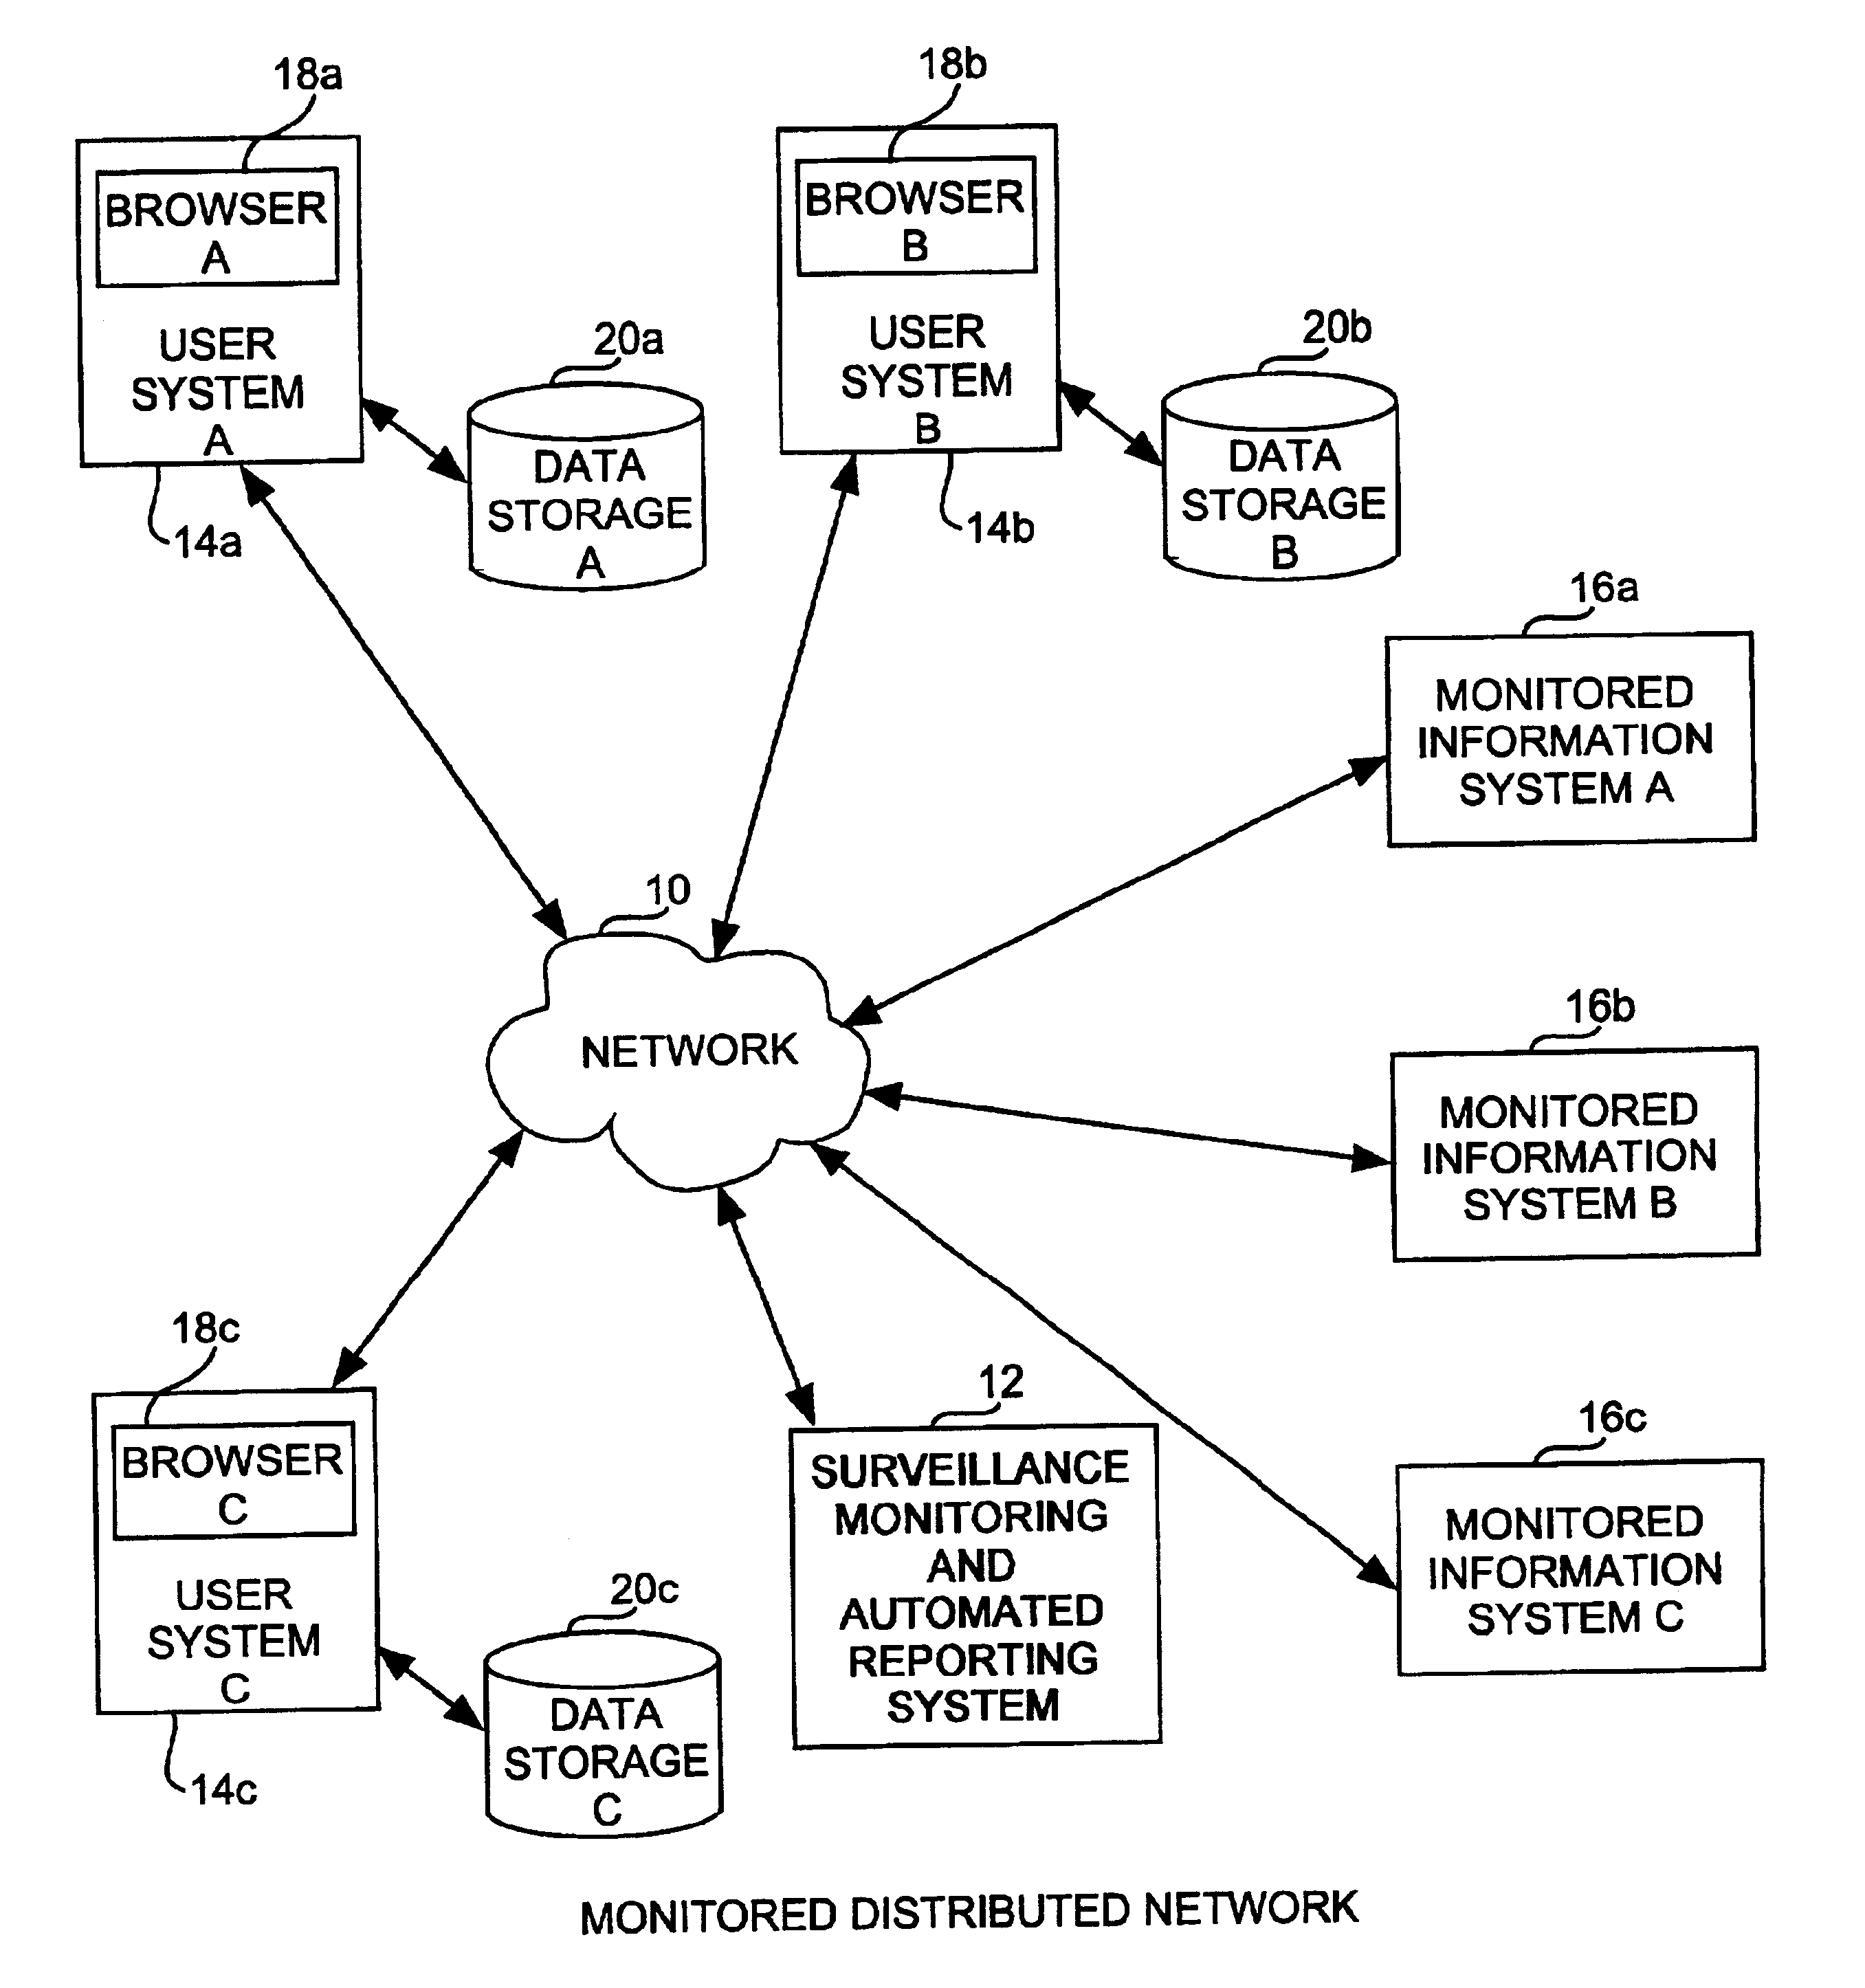 Surveillance monitoring and automated reporting method for detecting data changes